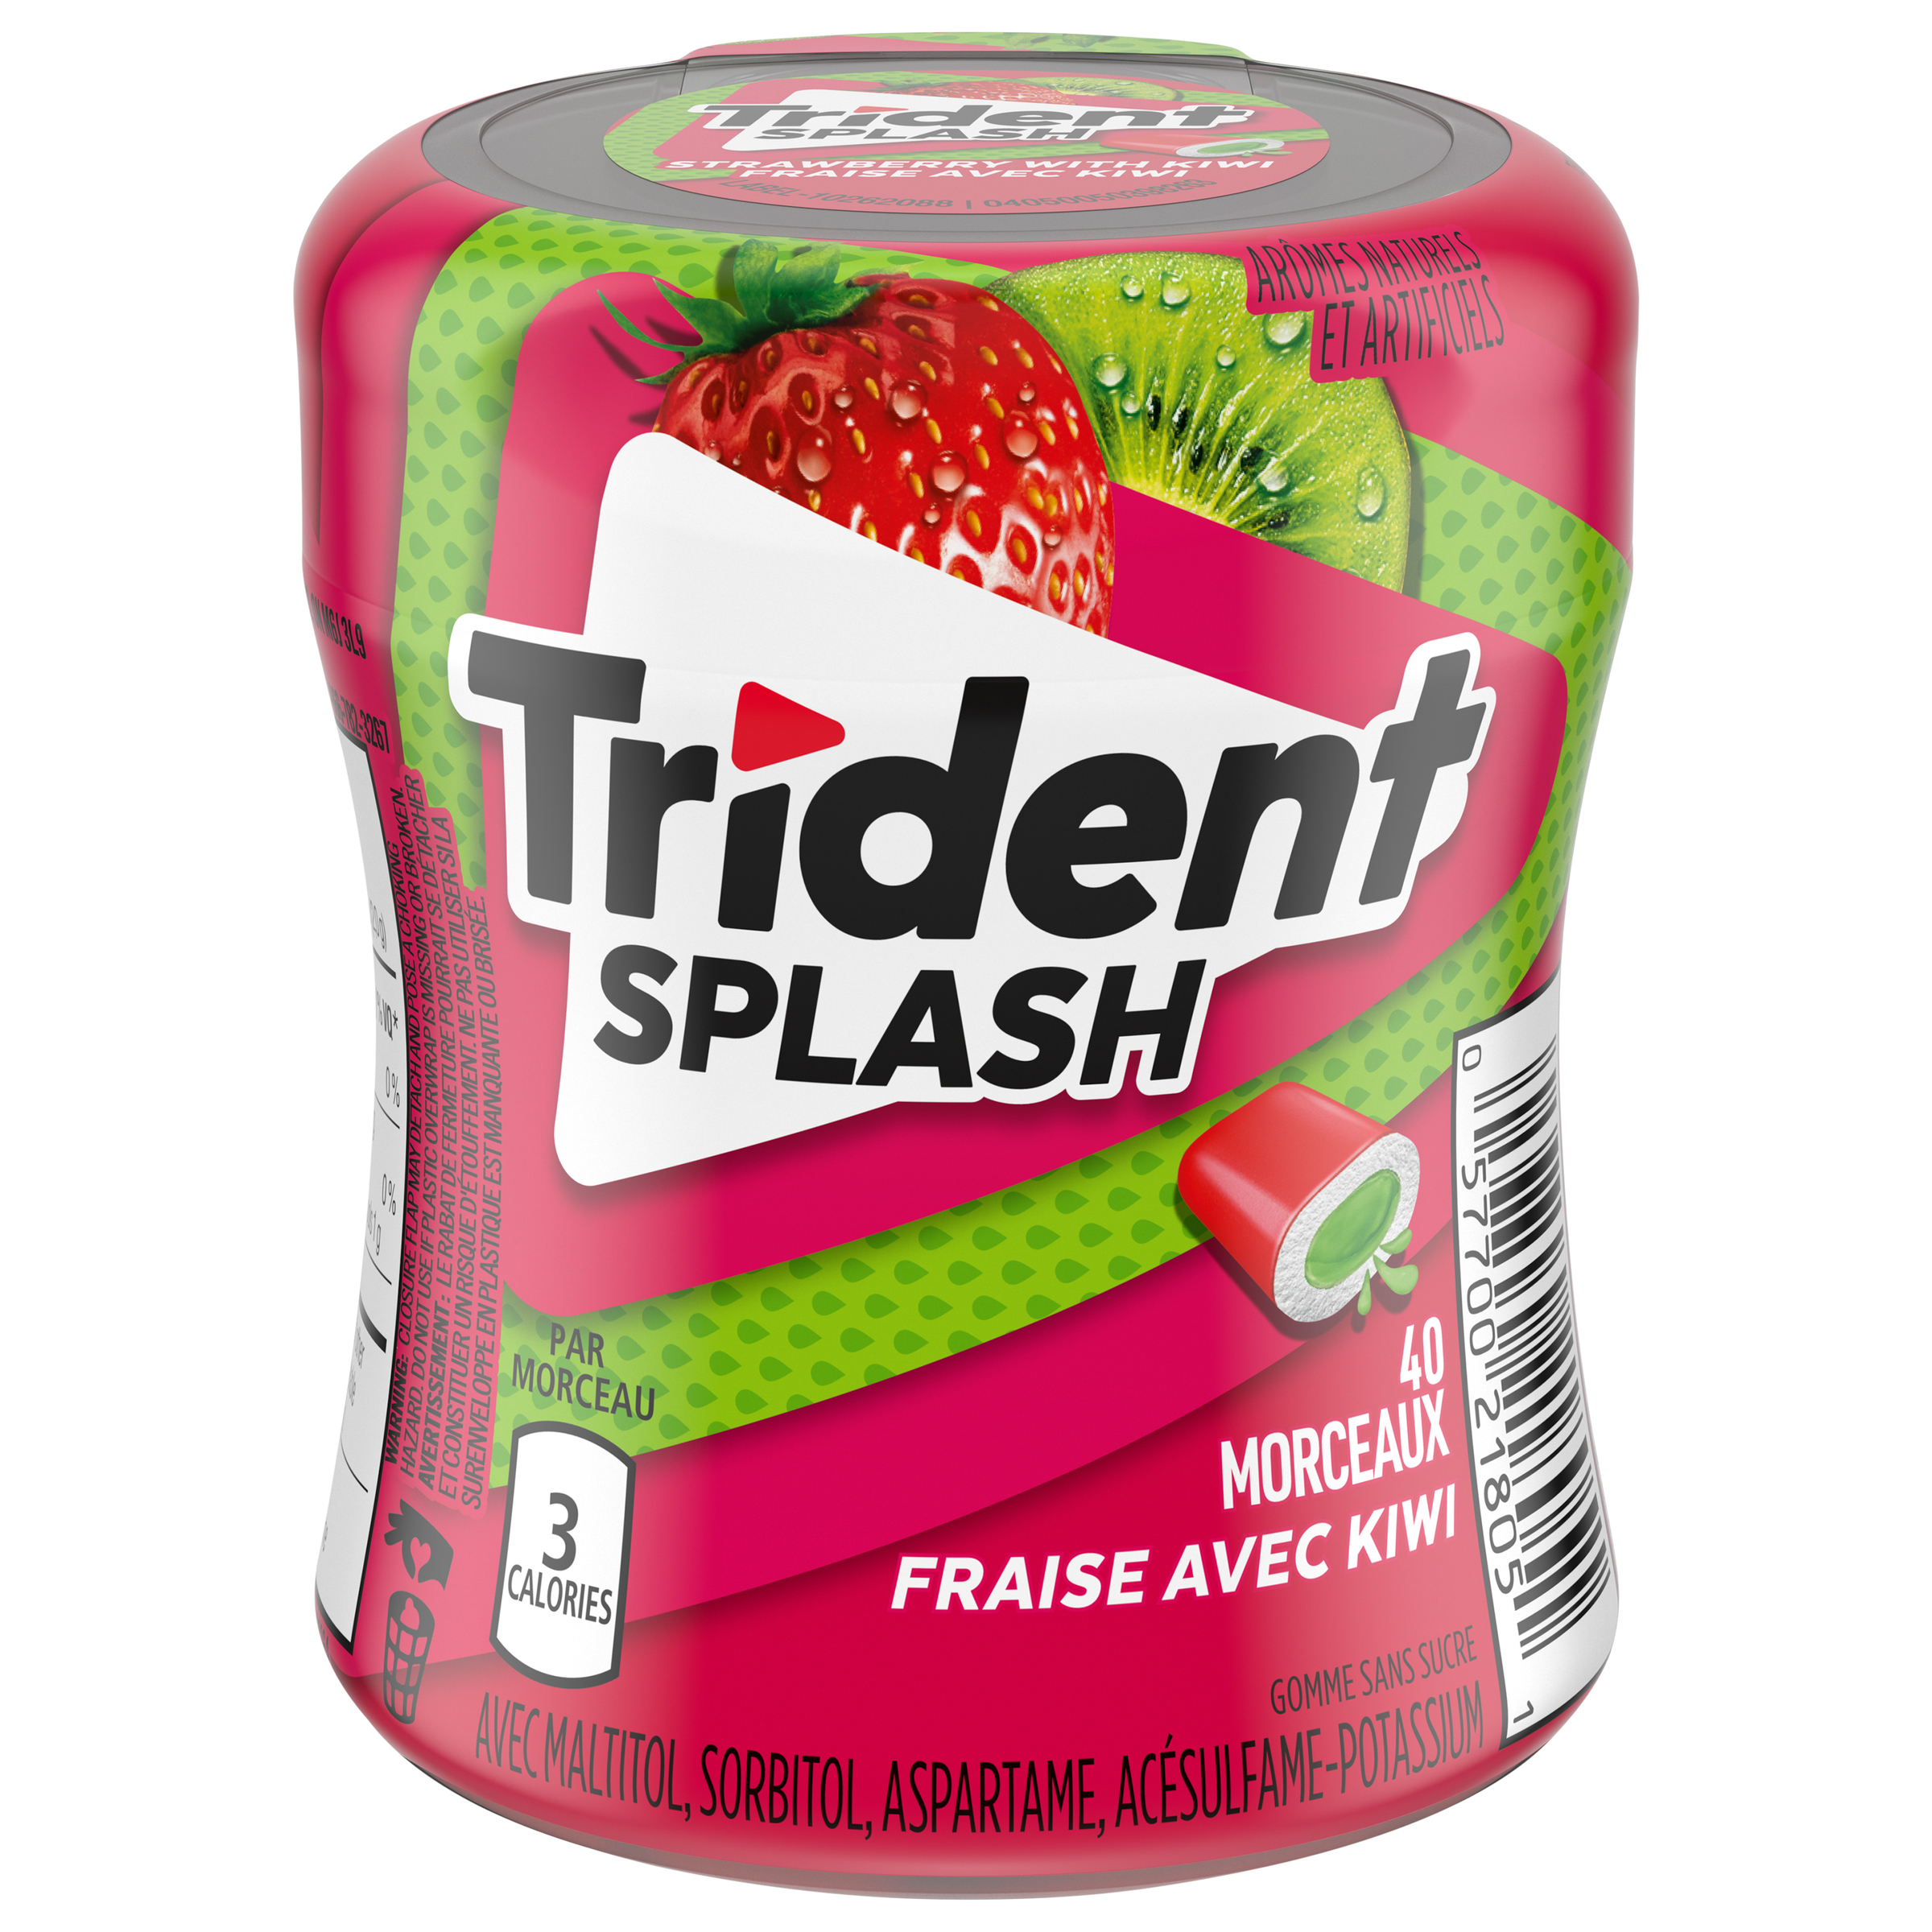 Trident Splash Sugar Free Gum, Strawberry with Lime Flavour, 1 Go-Cup (40 Pieces Total)-0